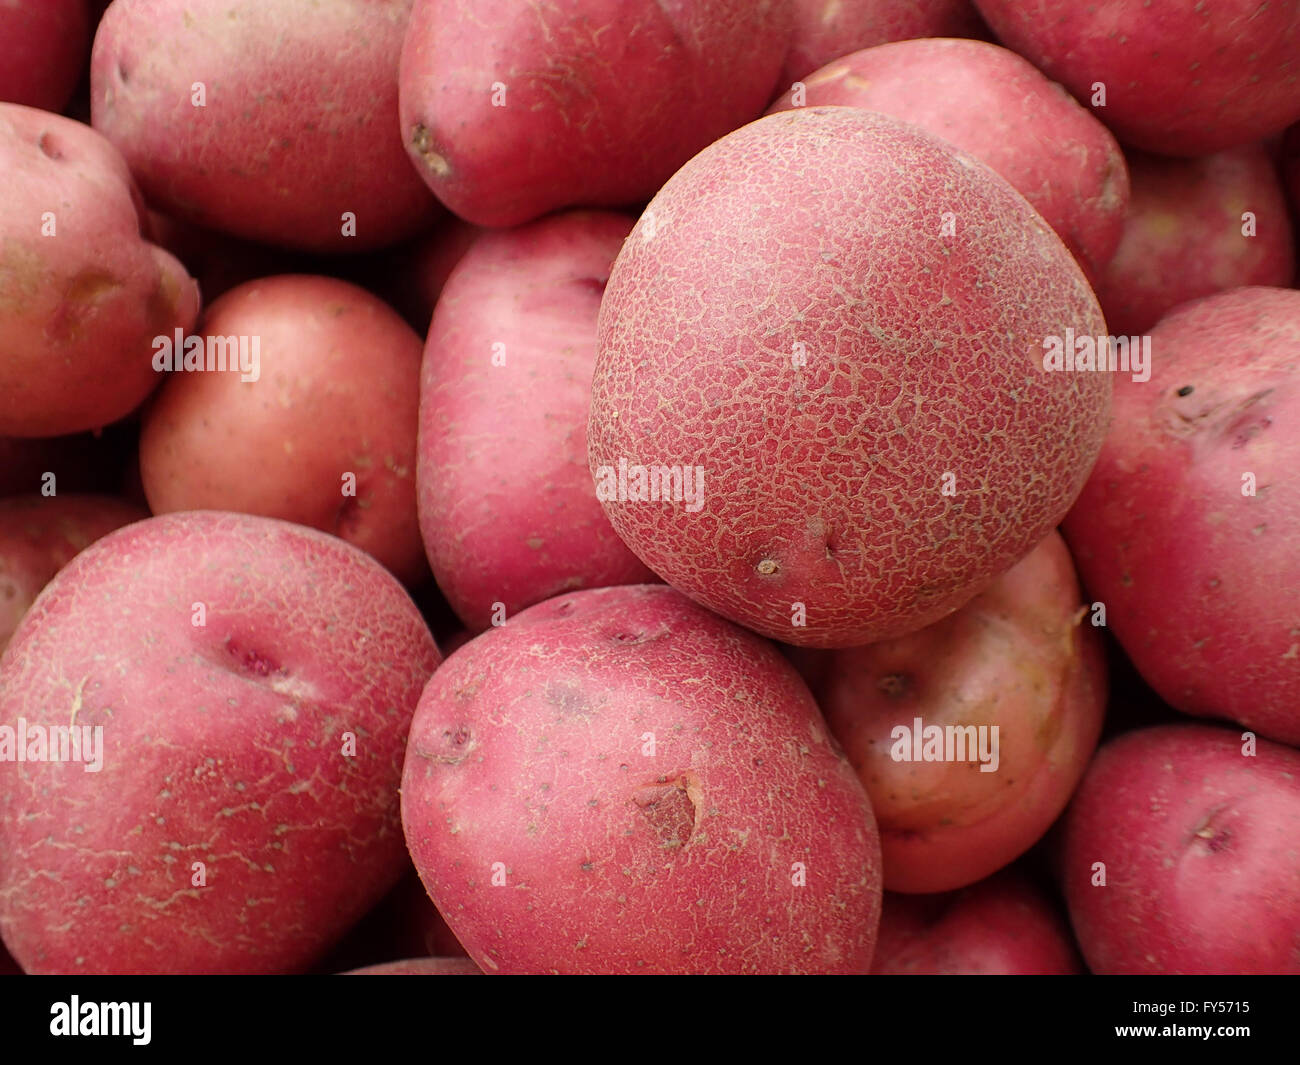 Pile of Red Potatoes for sale at farmers market in Maui, Hawaii. Stock Photo